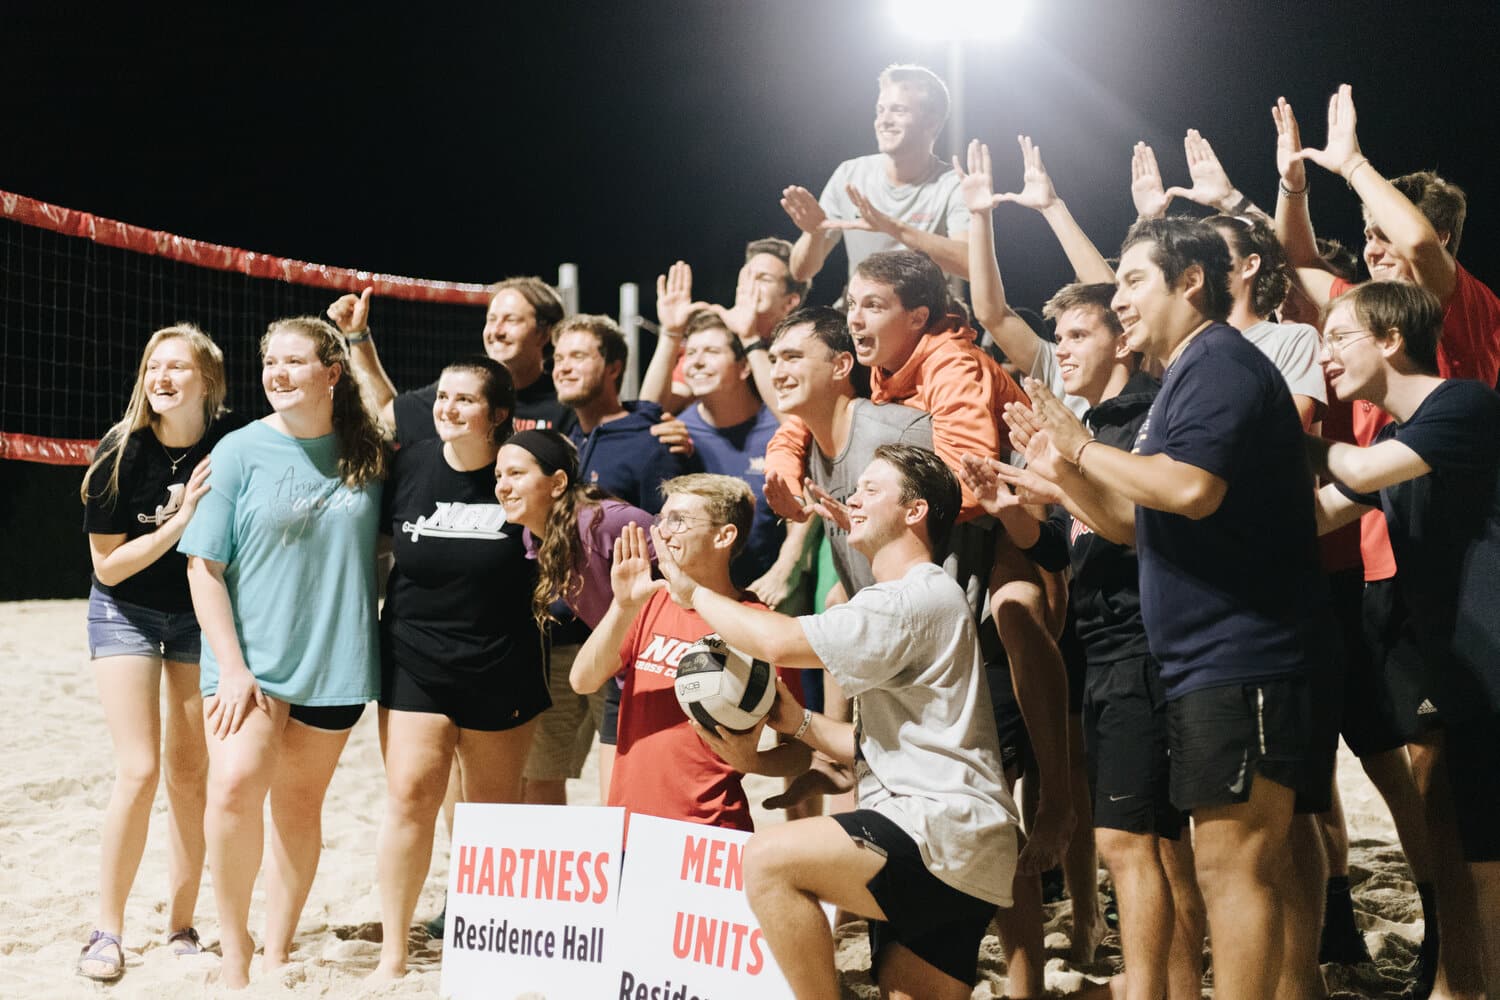 This year, Hartness and the Men’s Units won the volleyball tournament.